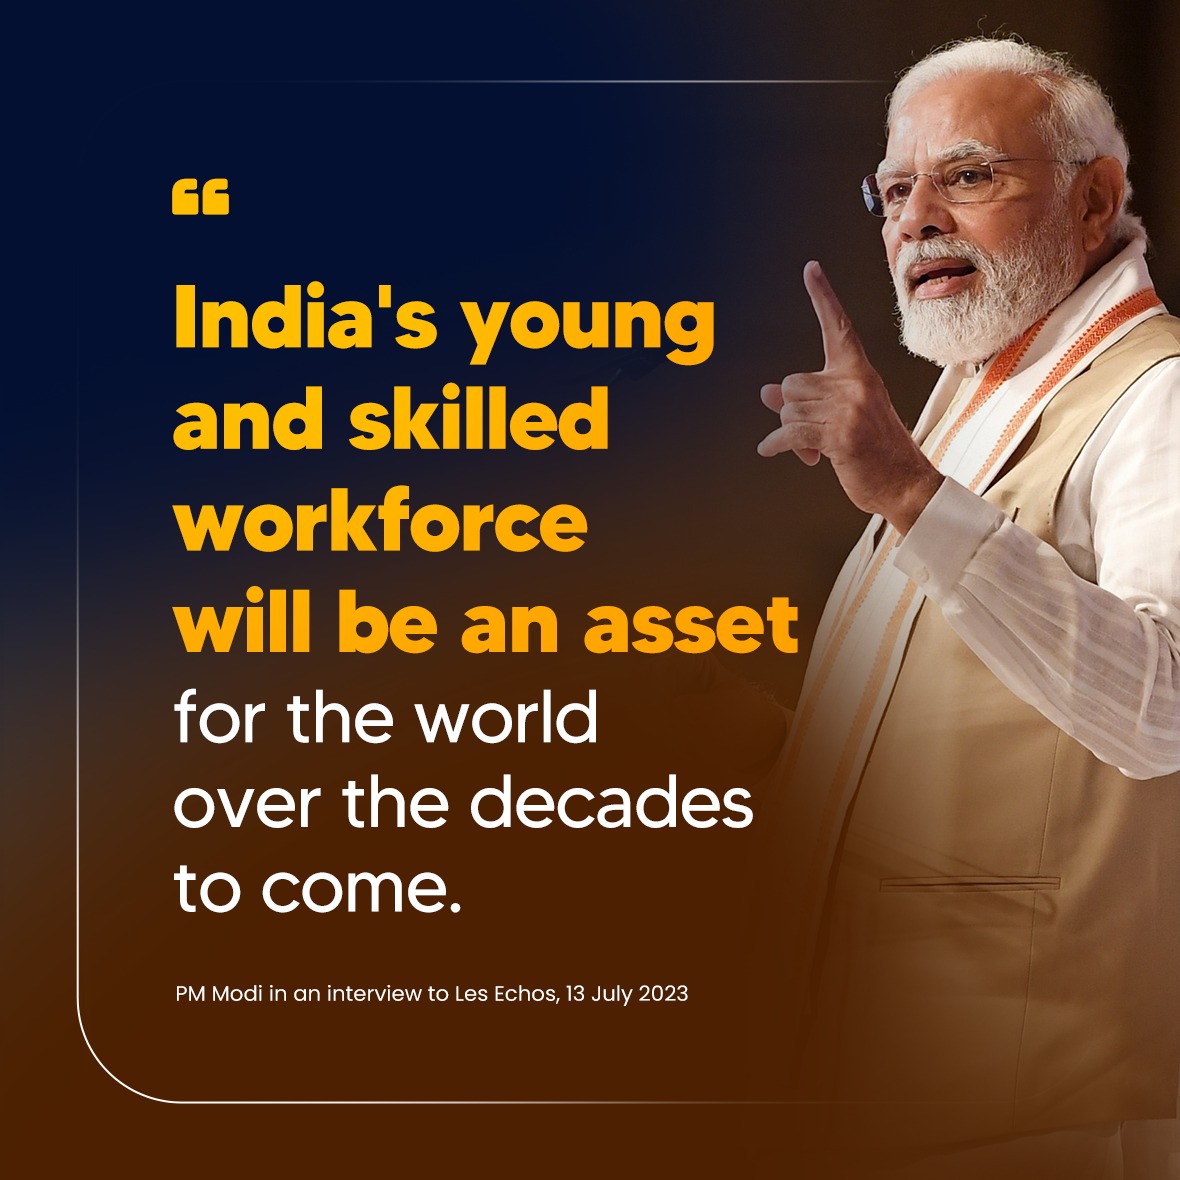 India's youth, a global asset in the making!

PM Shri @narendramodi ji highlights the skilled workforce that will shape the world in the coming decades.

#YouthPower #SkilledWorkforce #GlobalLeadership